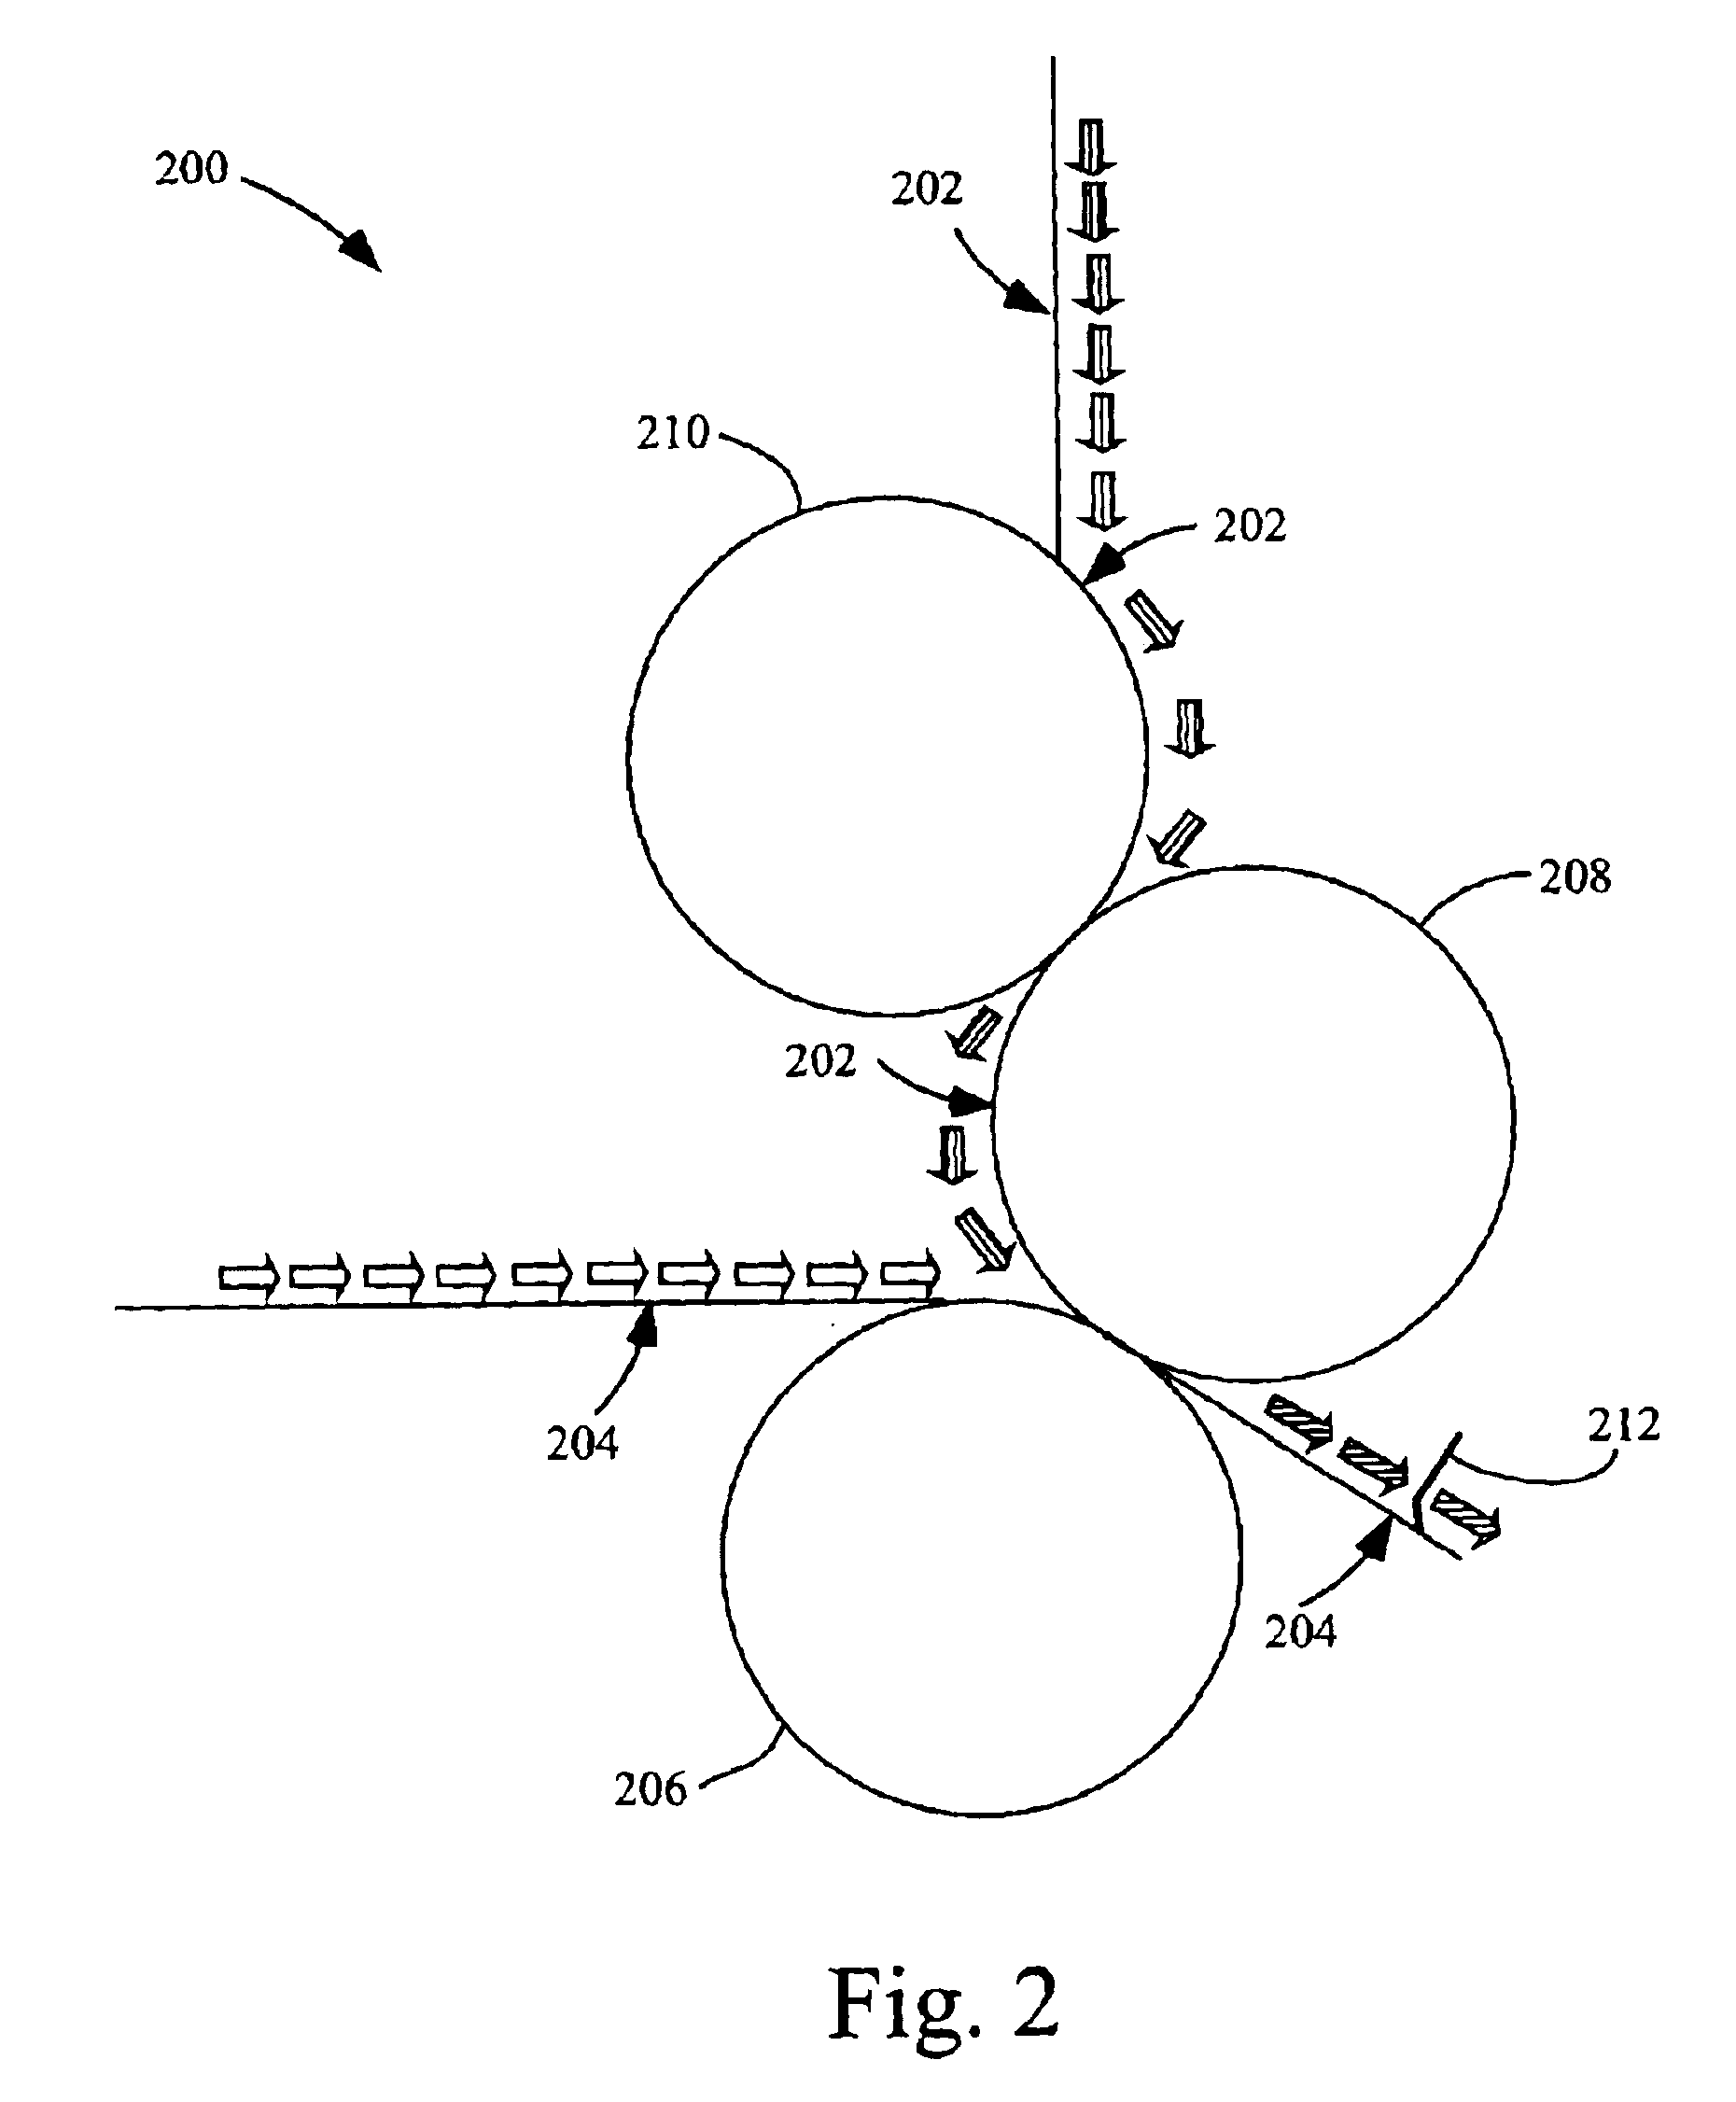 Electrochemical double layer capacitor having carbon powder electrodes